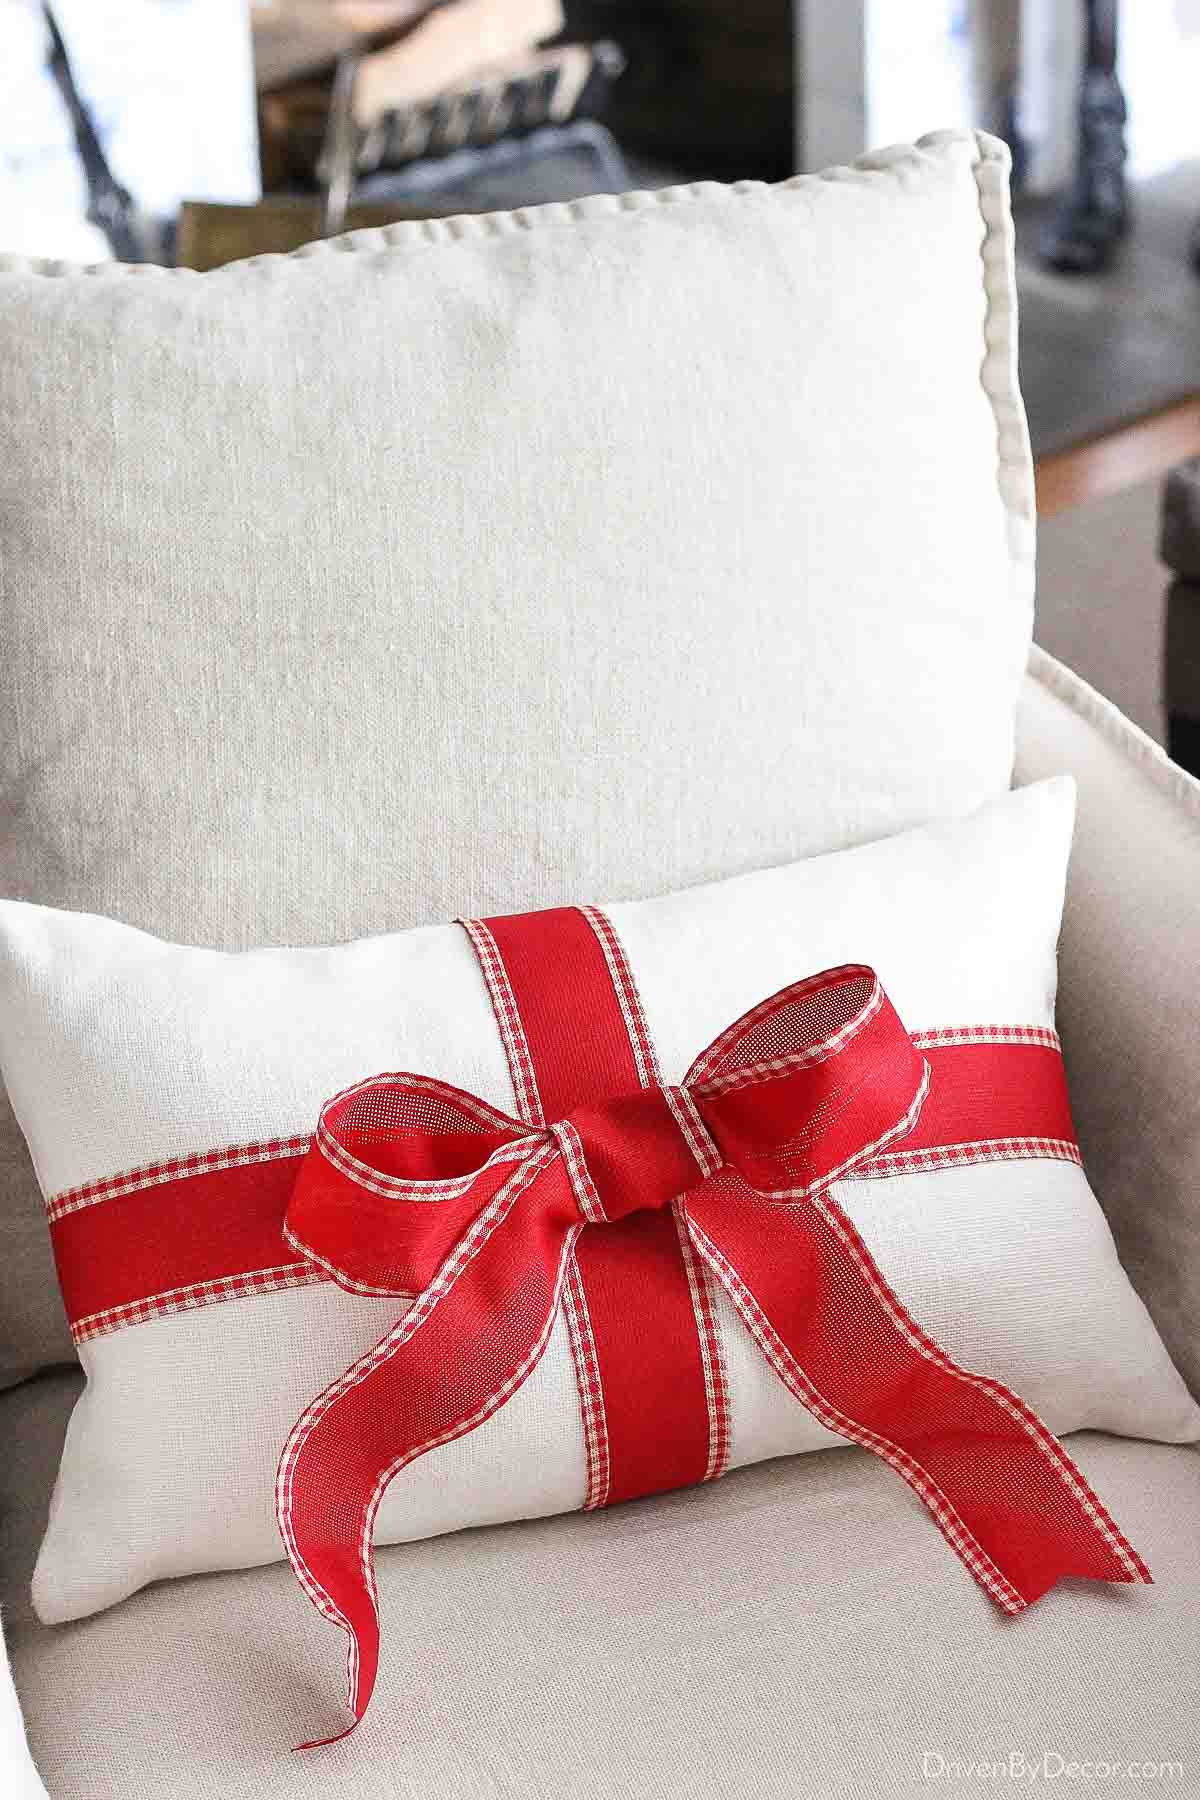 Tie a bow on a plain pillow to turn it into a Christmas pillow! Super simple decorating idea!